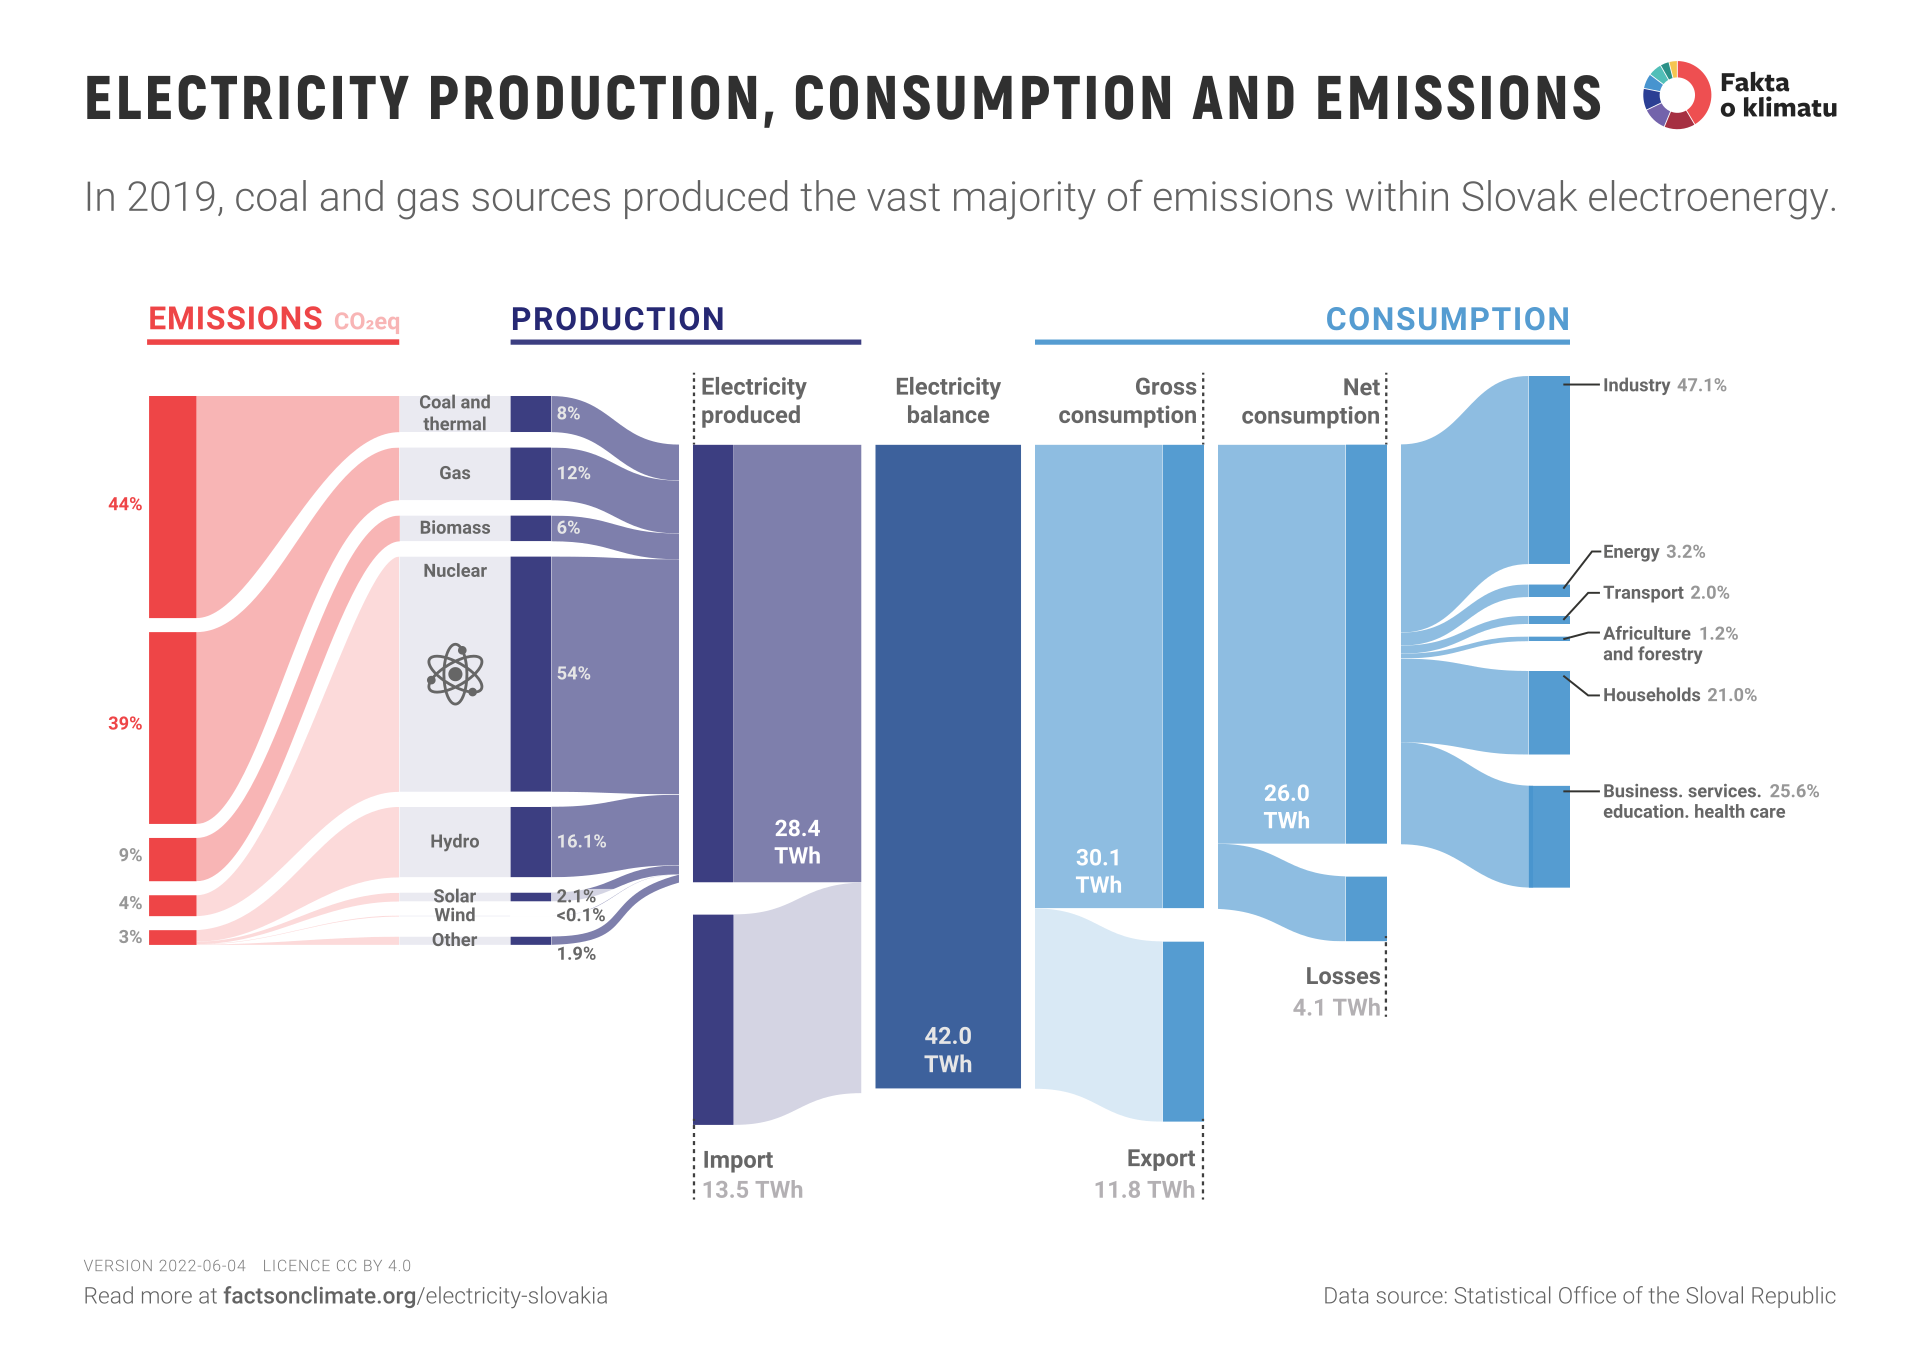 Electricity production, consumption and emissions